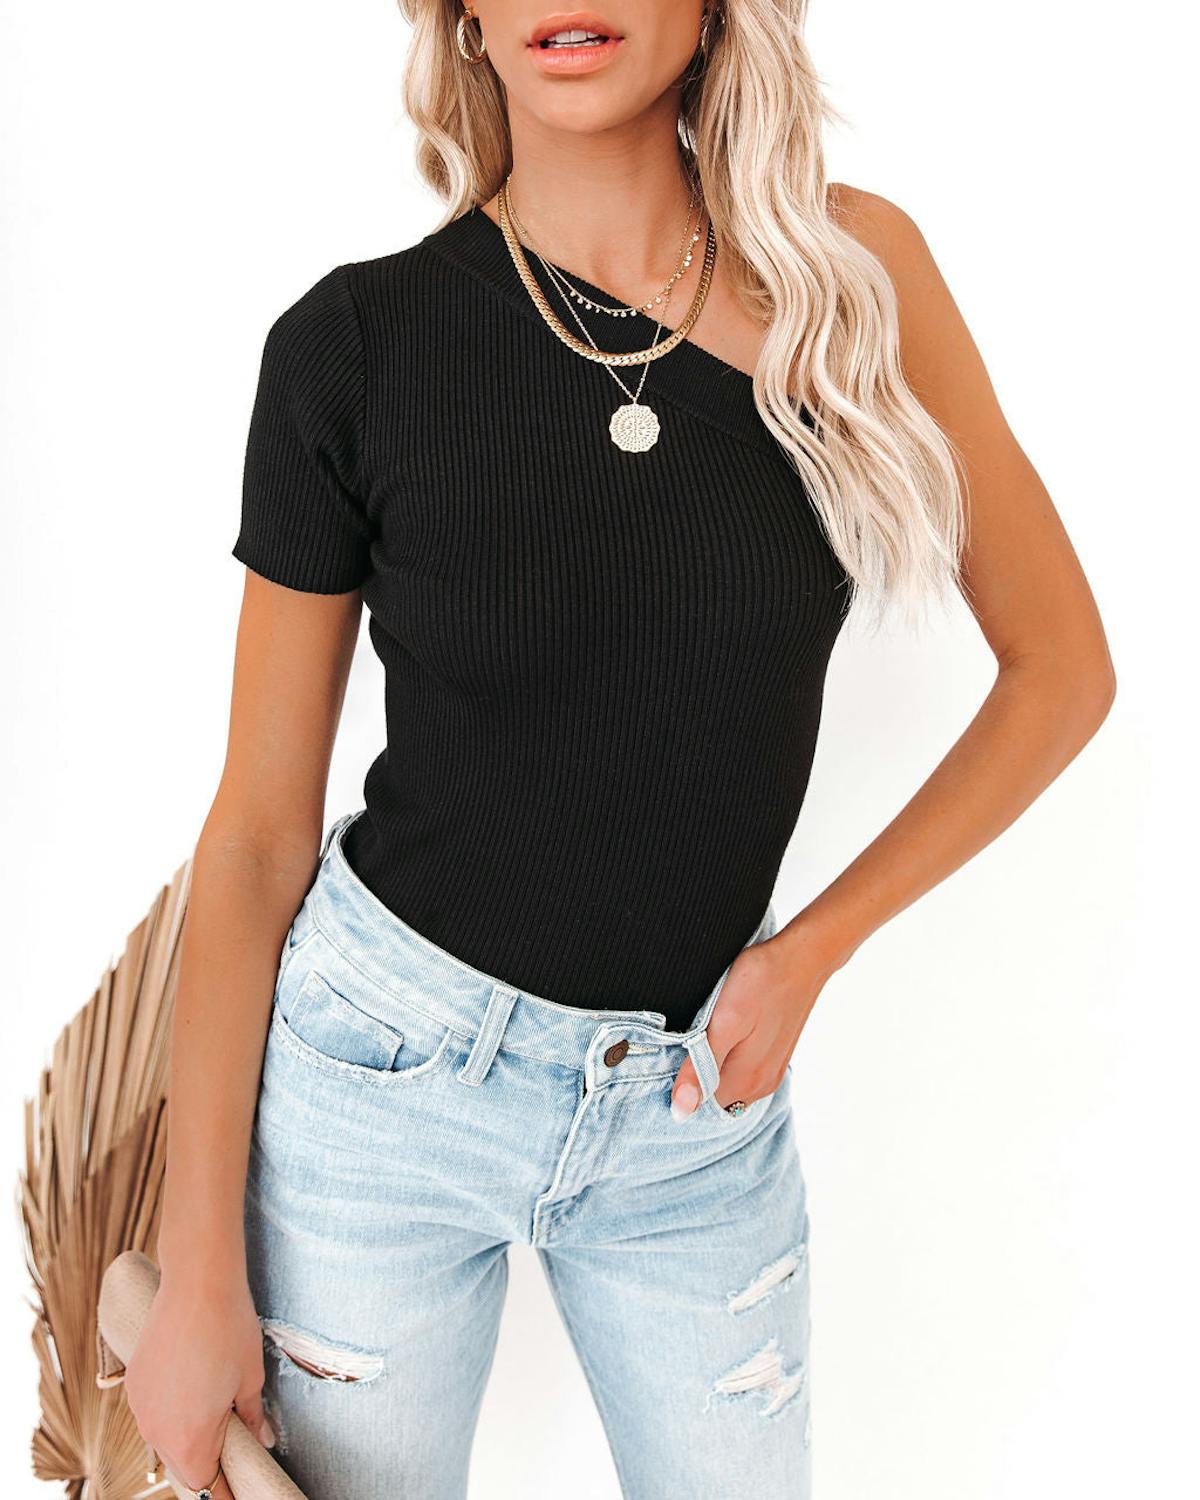 Admiration One Shoulder Ribbed Knit Top - Black - LAST CHANCE view 1